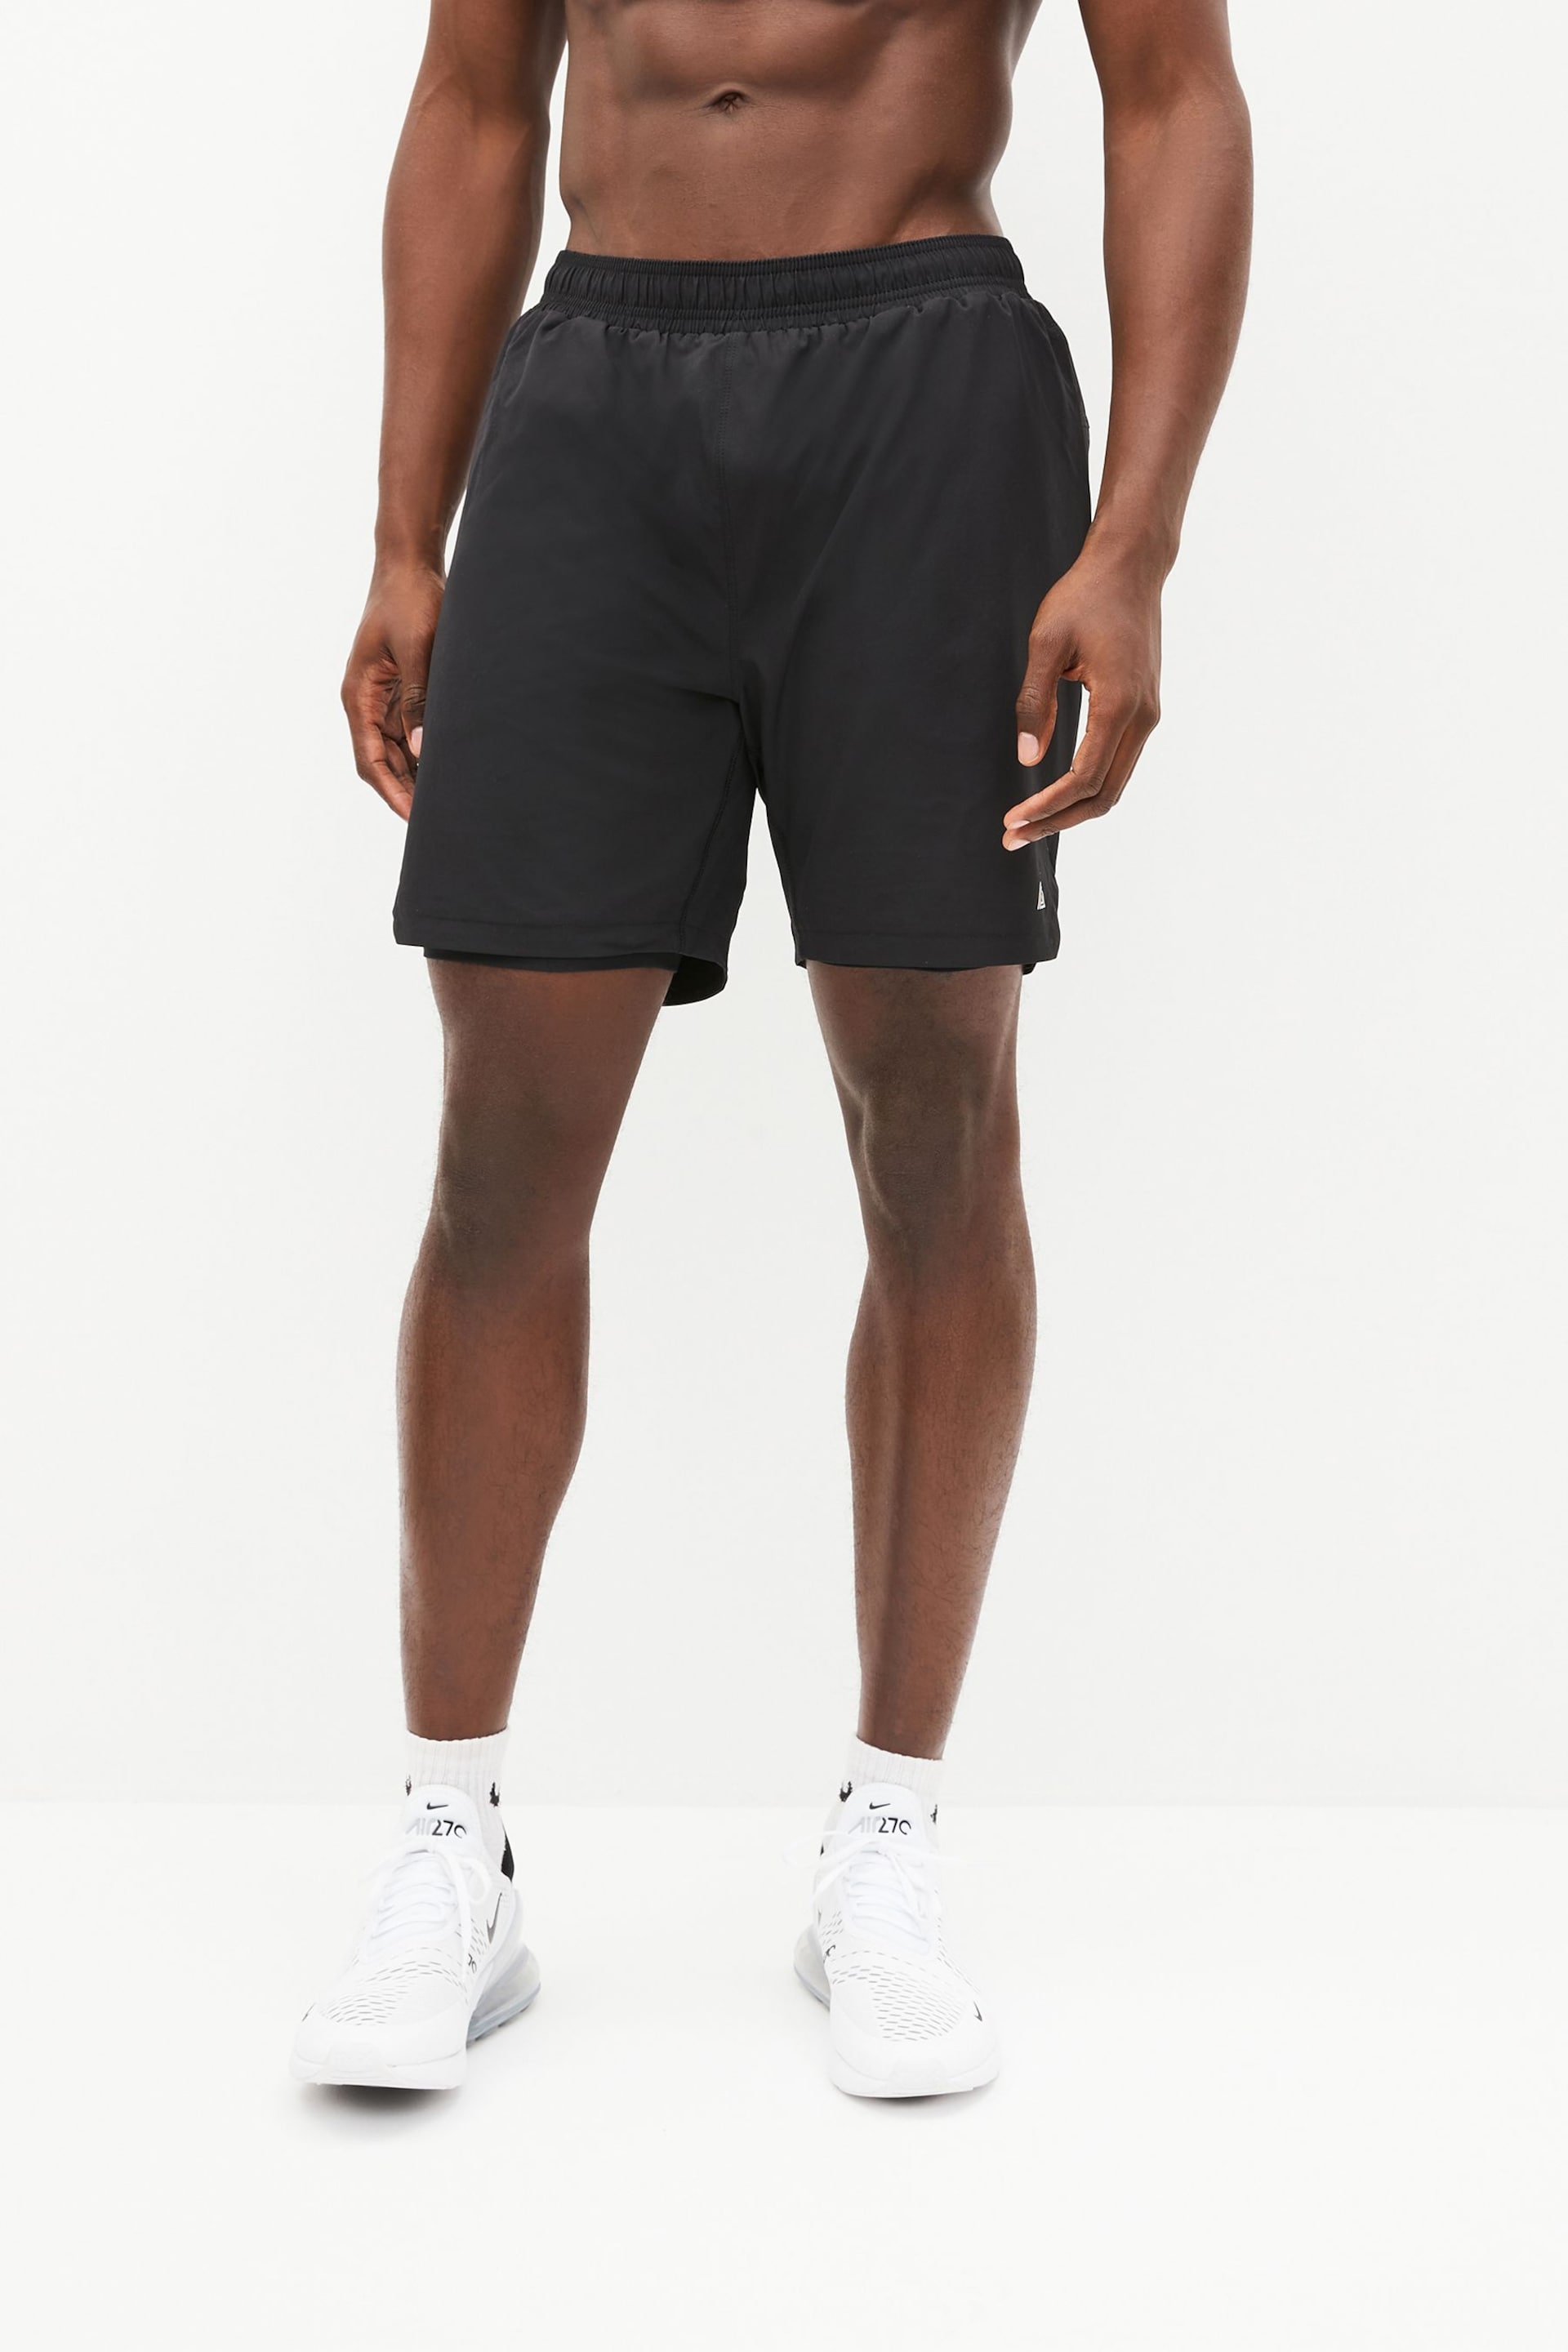 Black Training Shorts With Liner - Image 1 of 11